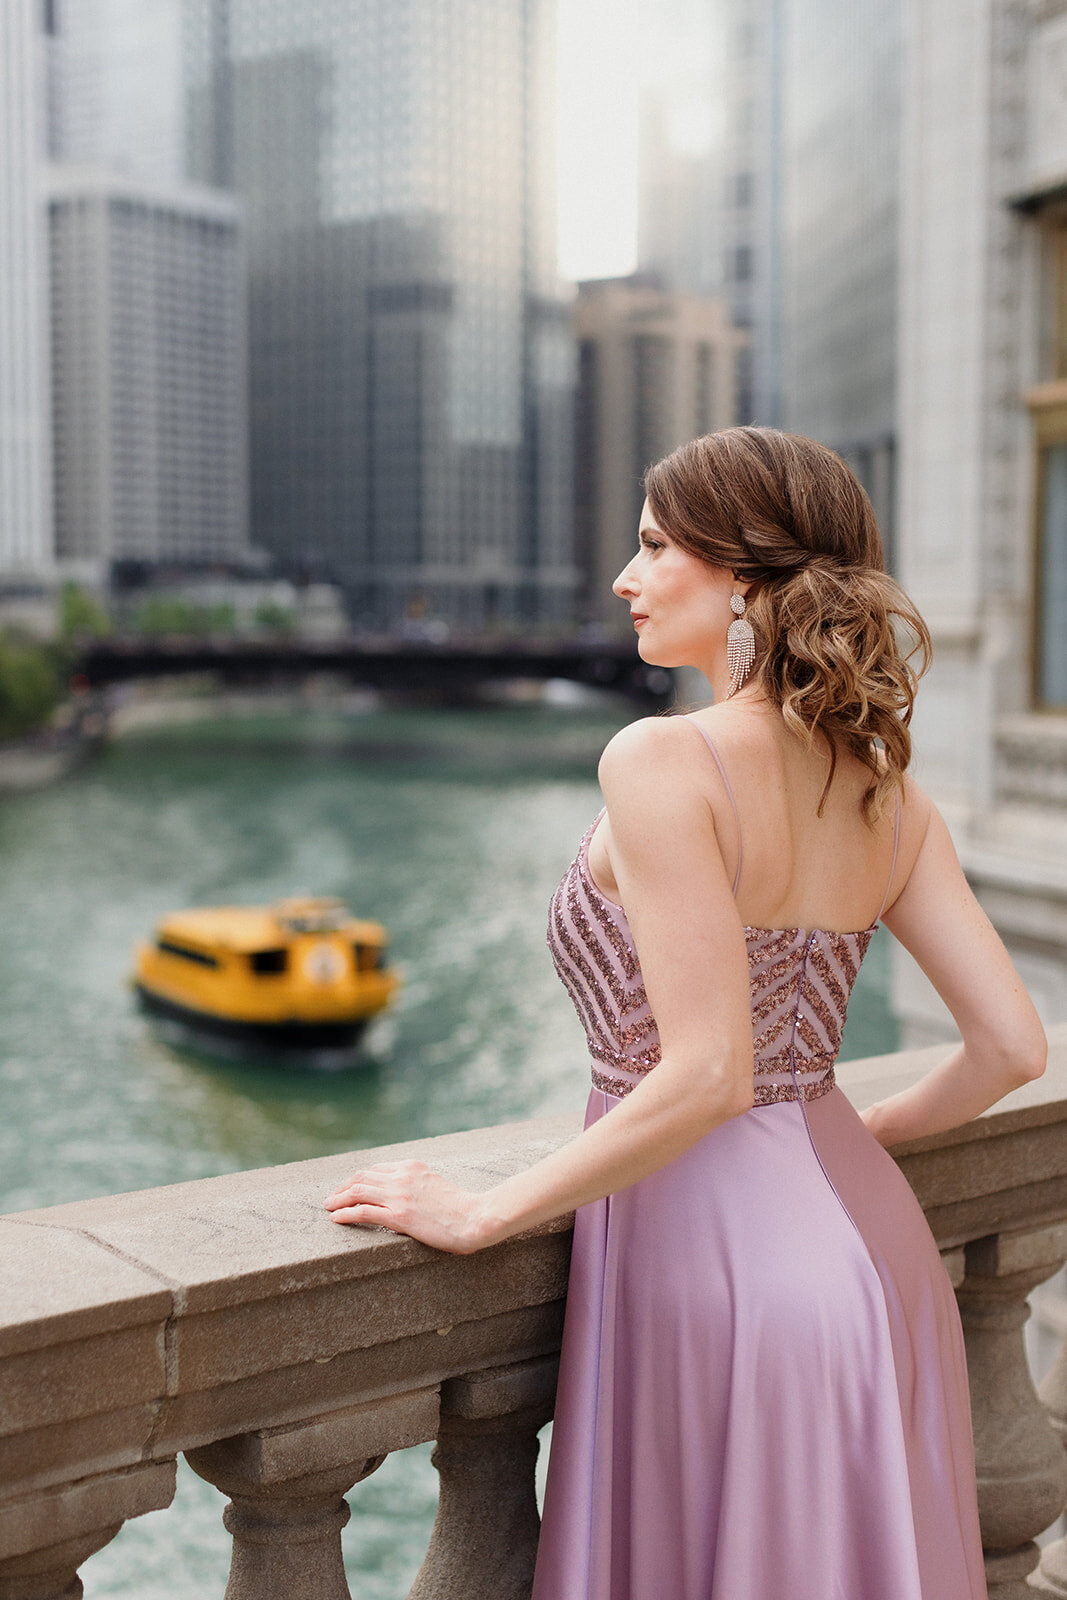 fair skinned woman in lavender gown is looking out over the Chicago River. A yellow boat is in the distance.